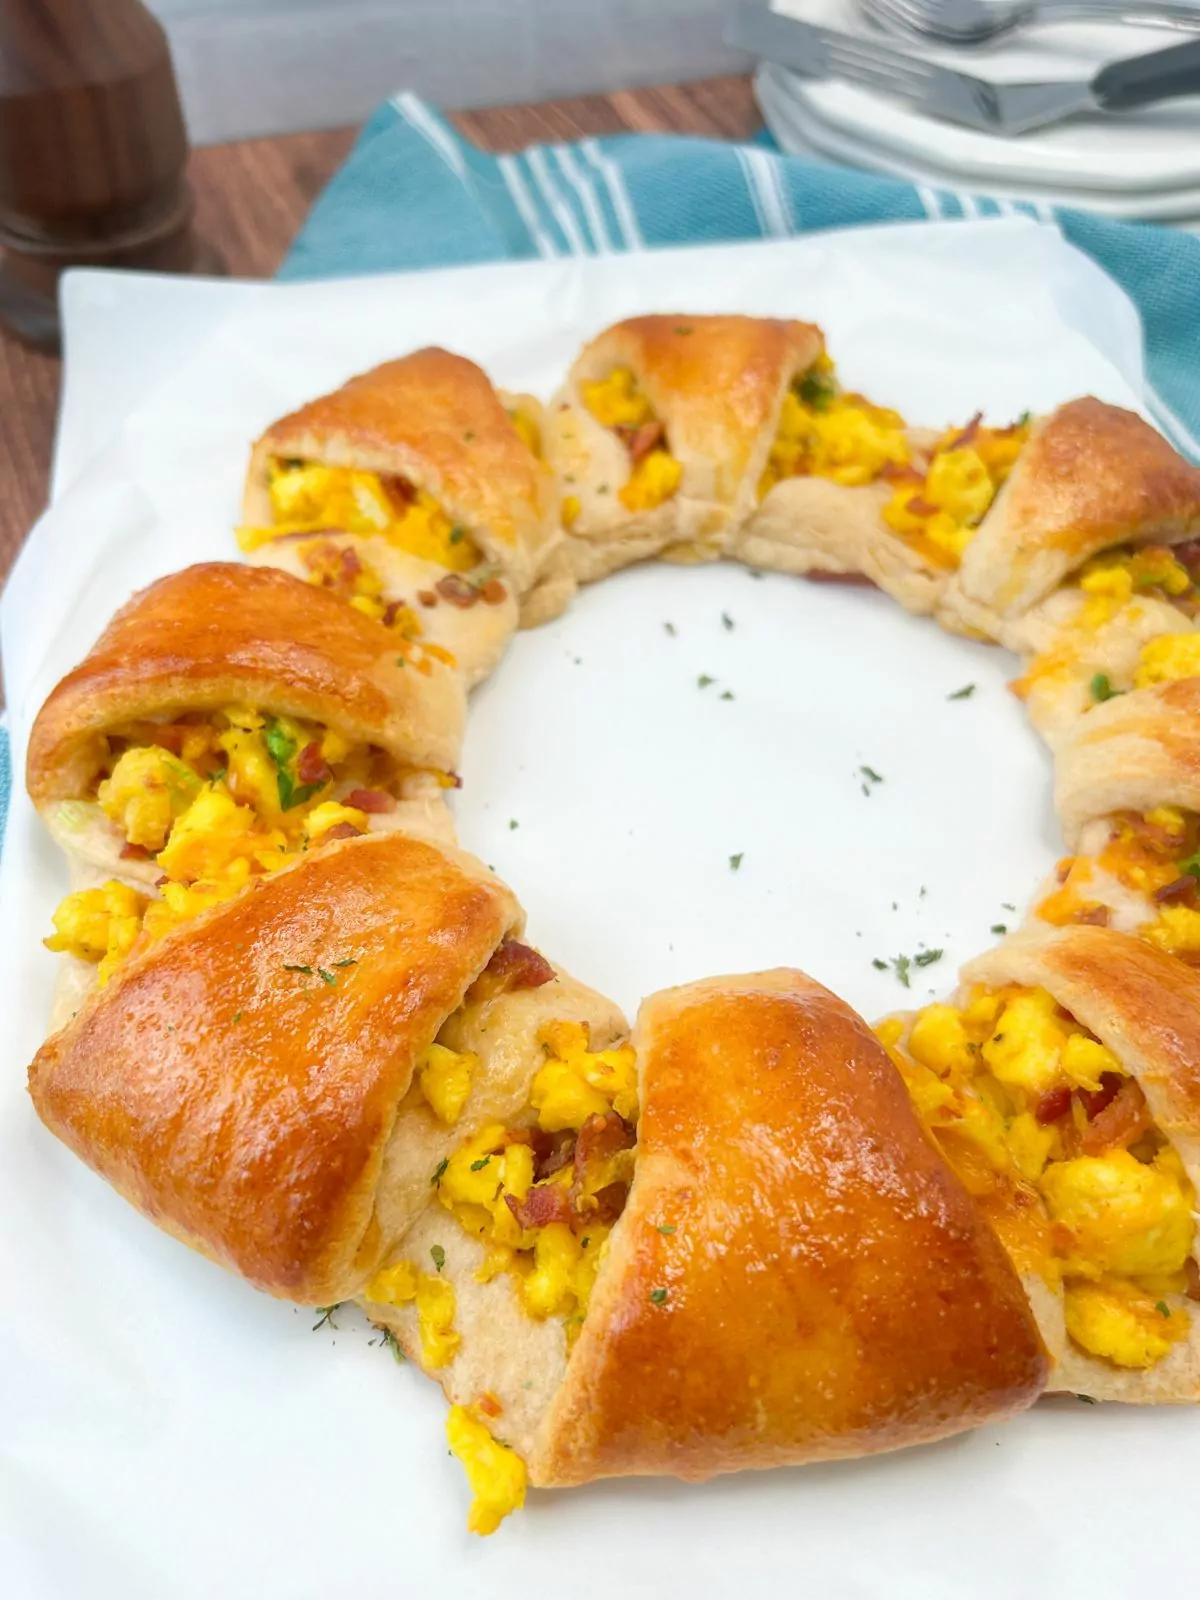 baked crescent roll wreath with eggs and bacon.